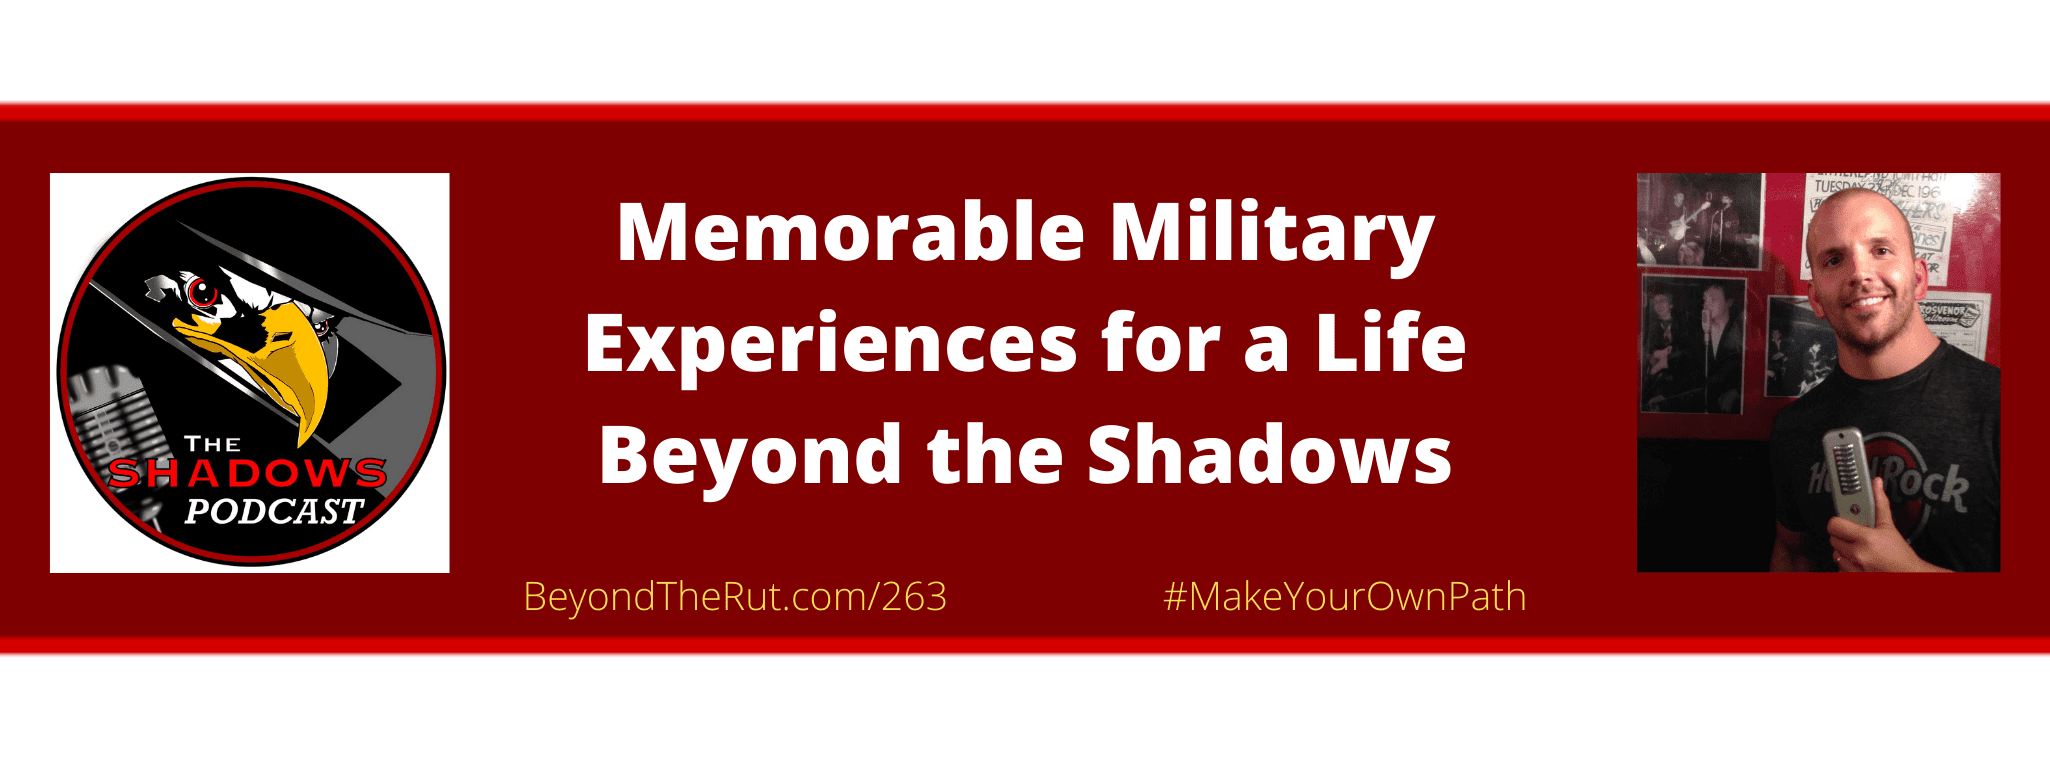 These memorable military experiences have shaped our views on leadership and life.